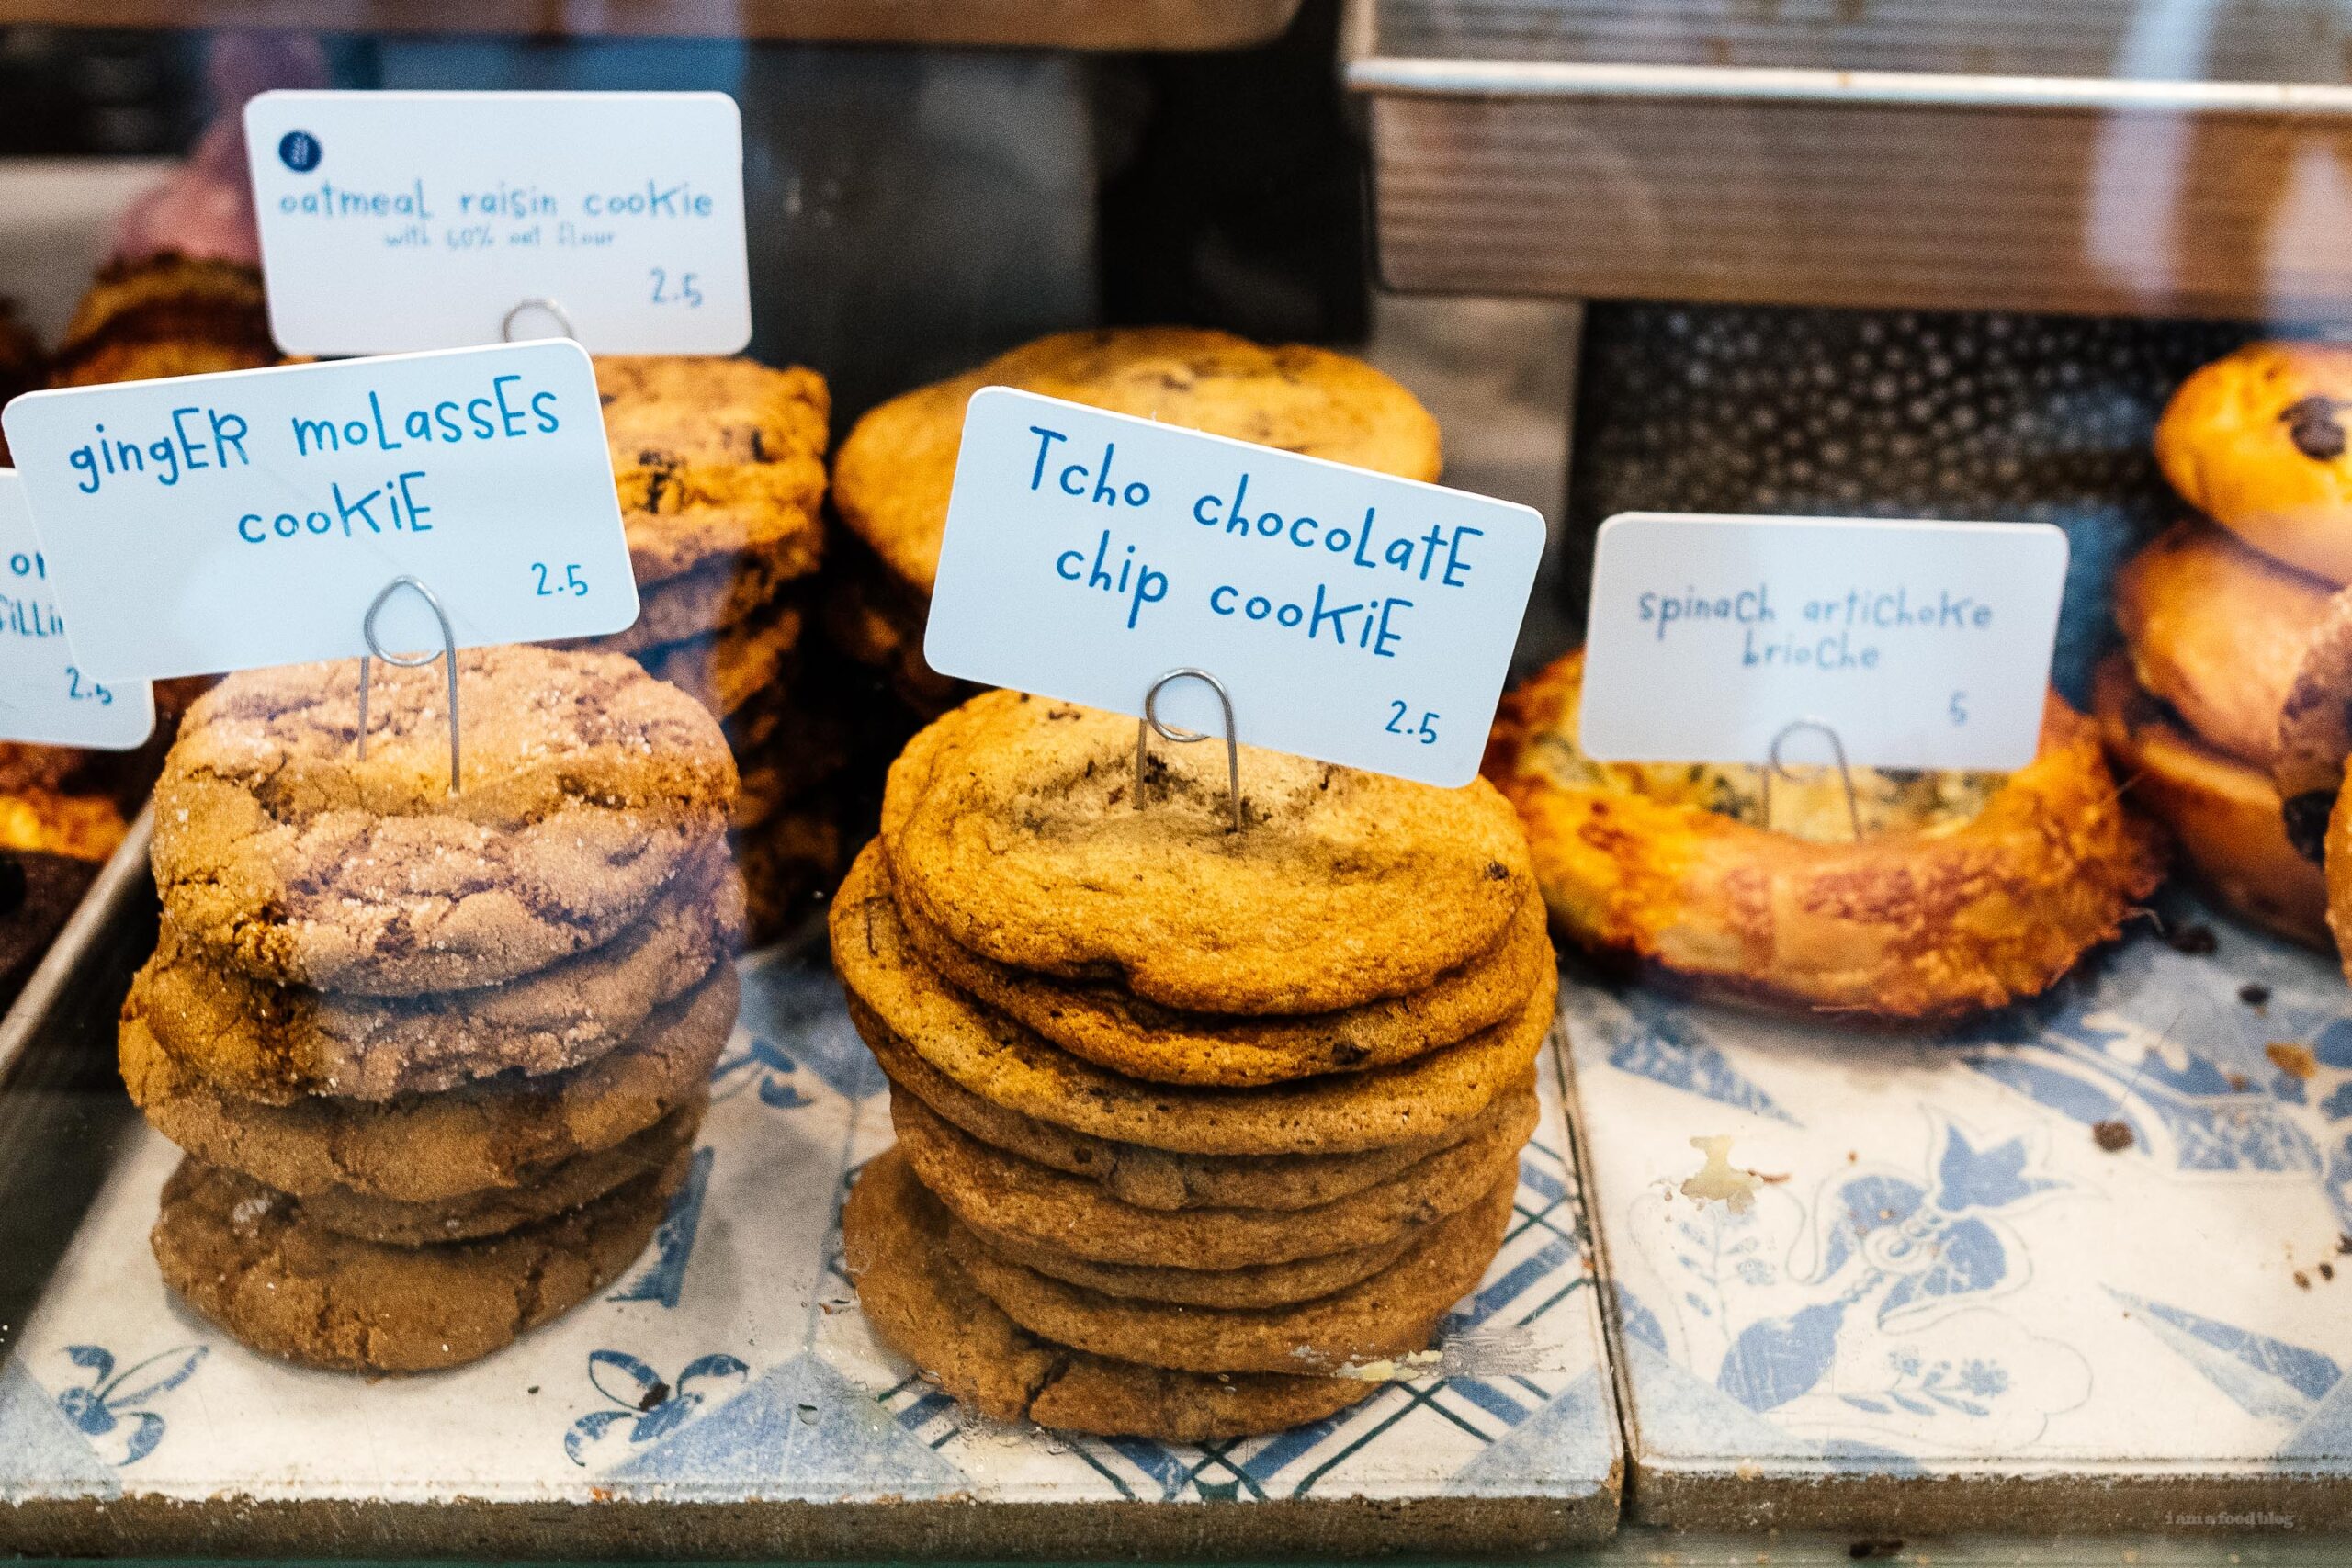 Chocolate Chip Cookie Review: Flour Bakery, Boston, Massachusetts